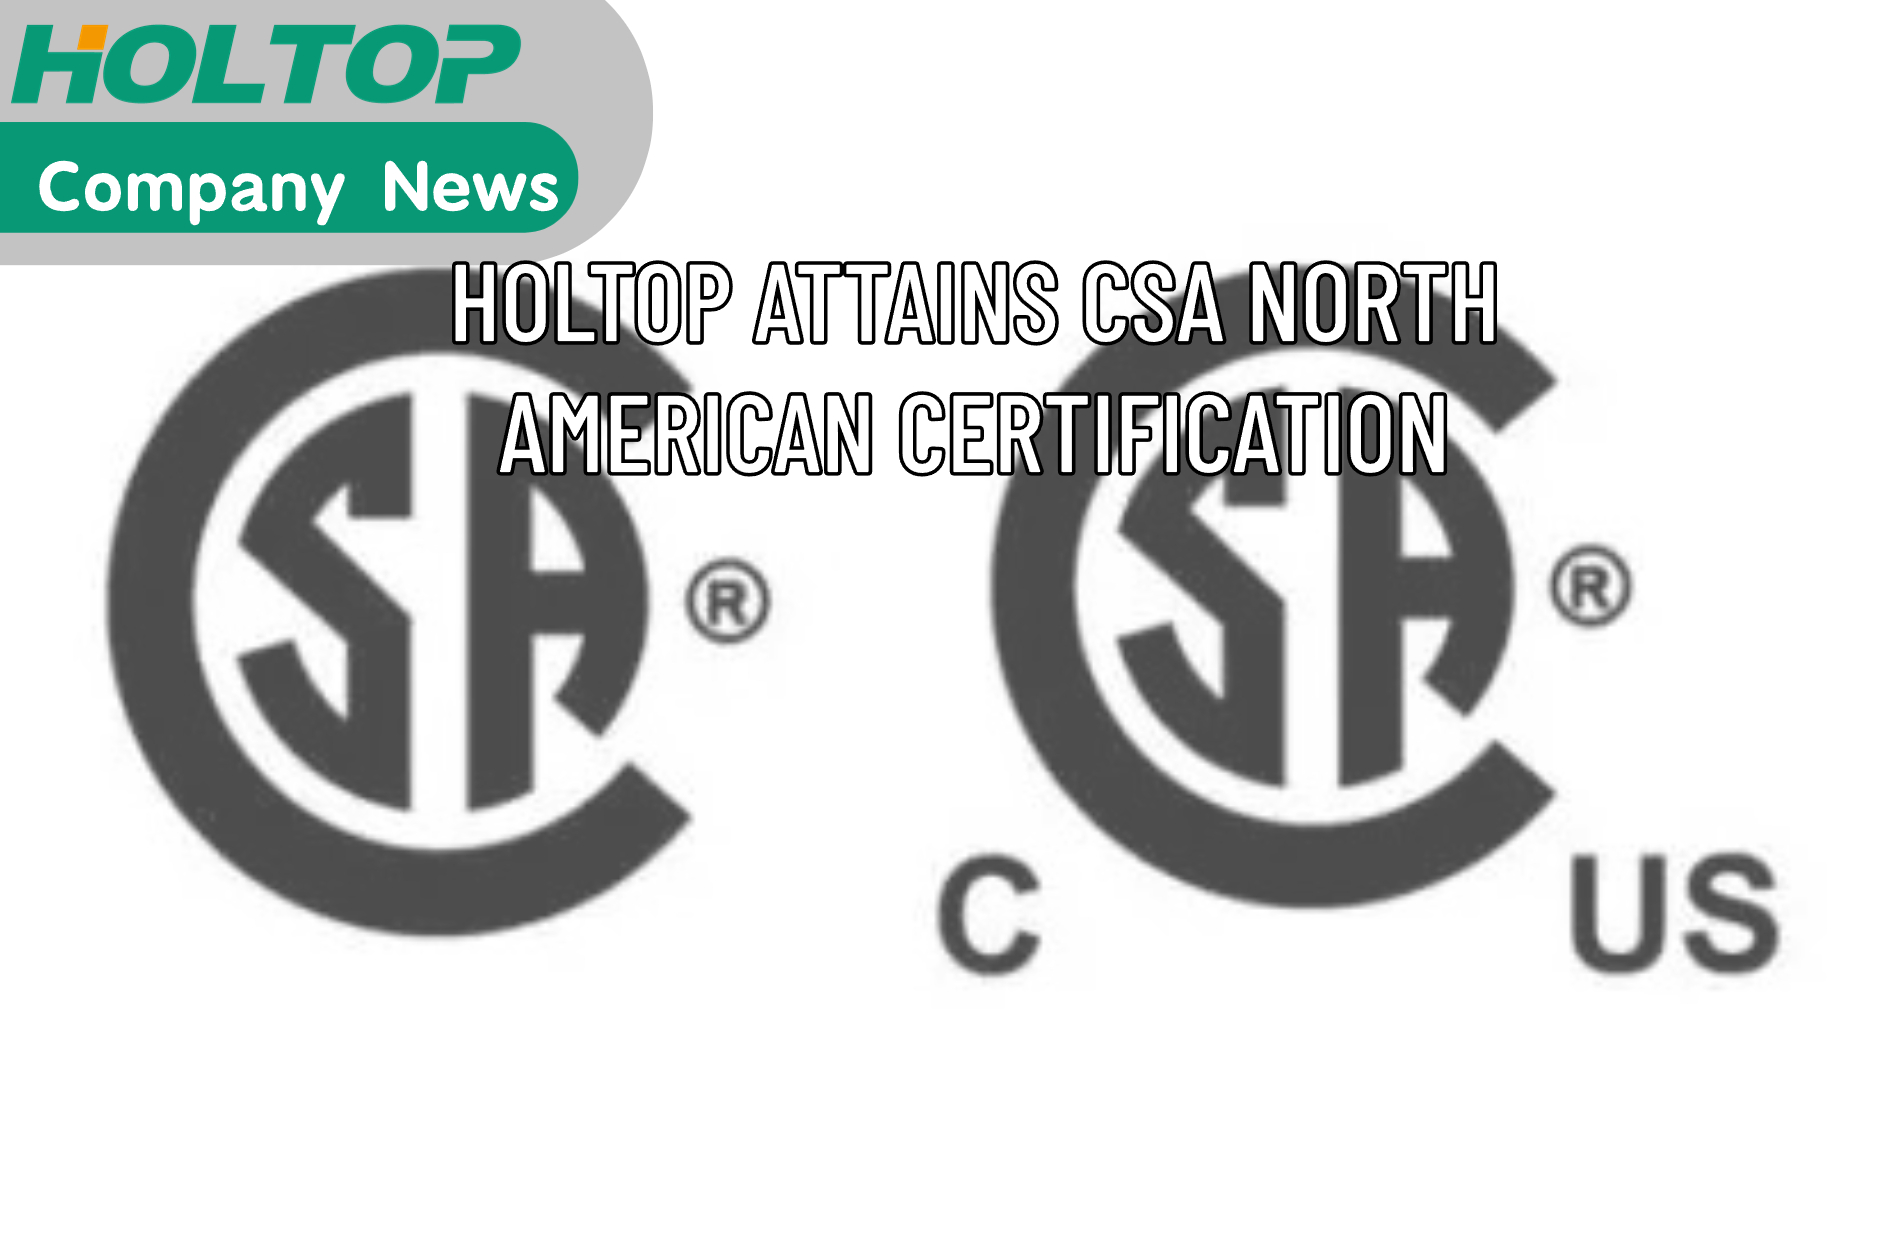 Holtop Attains CSA North American Certification